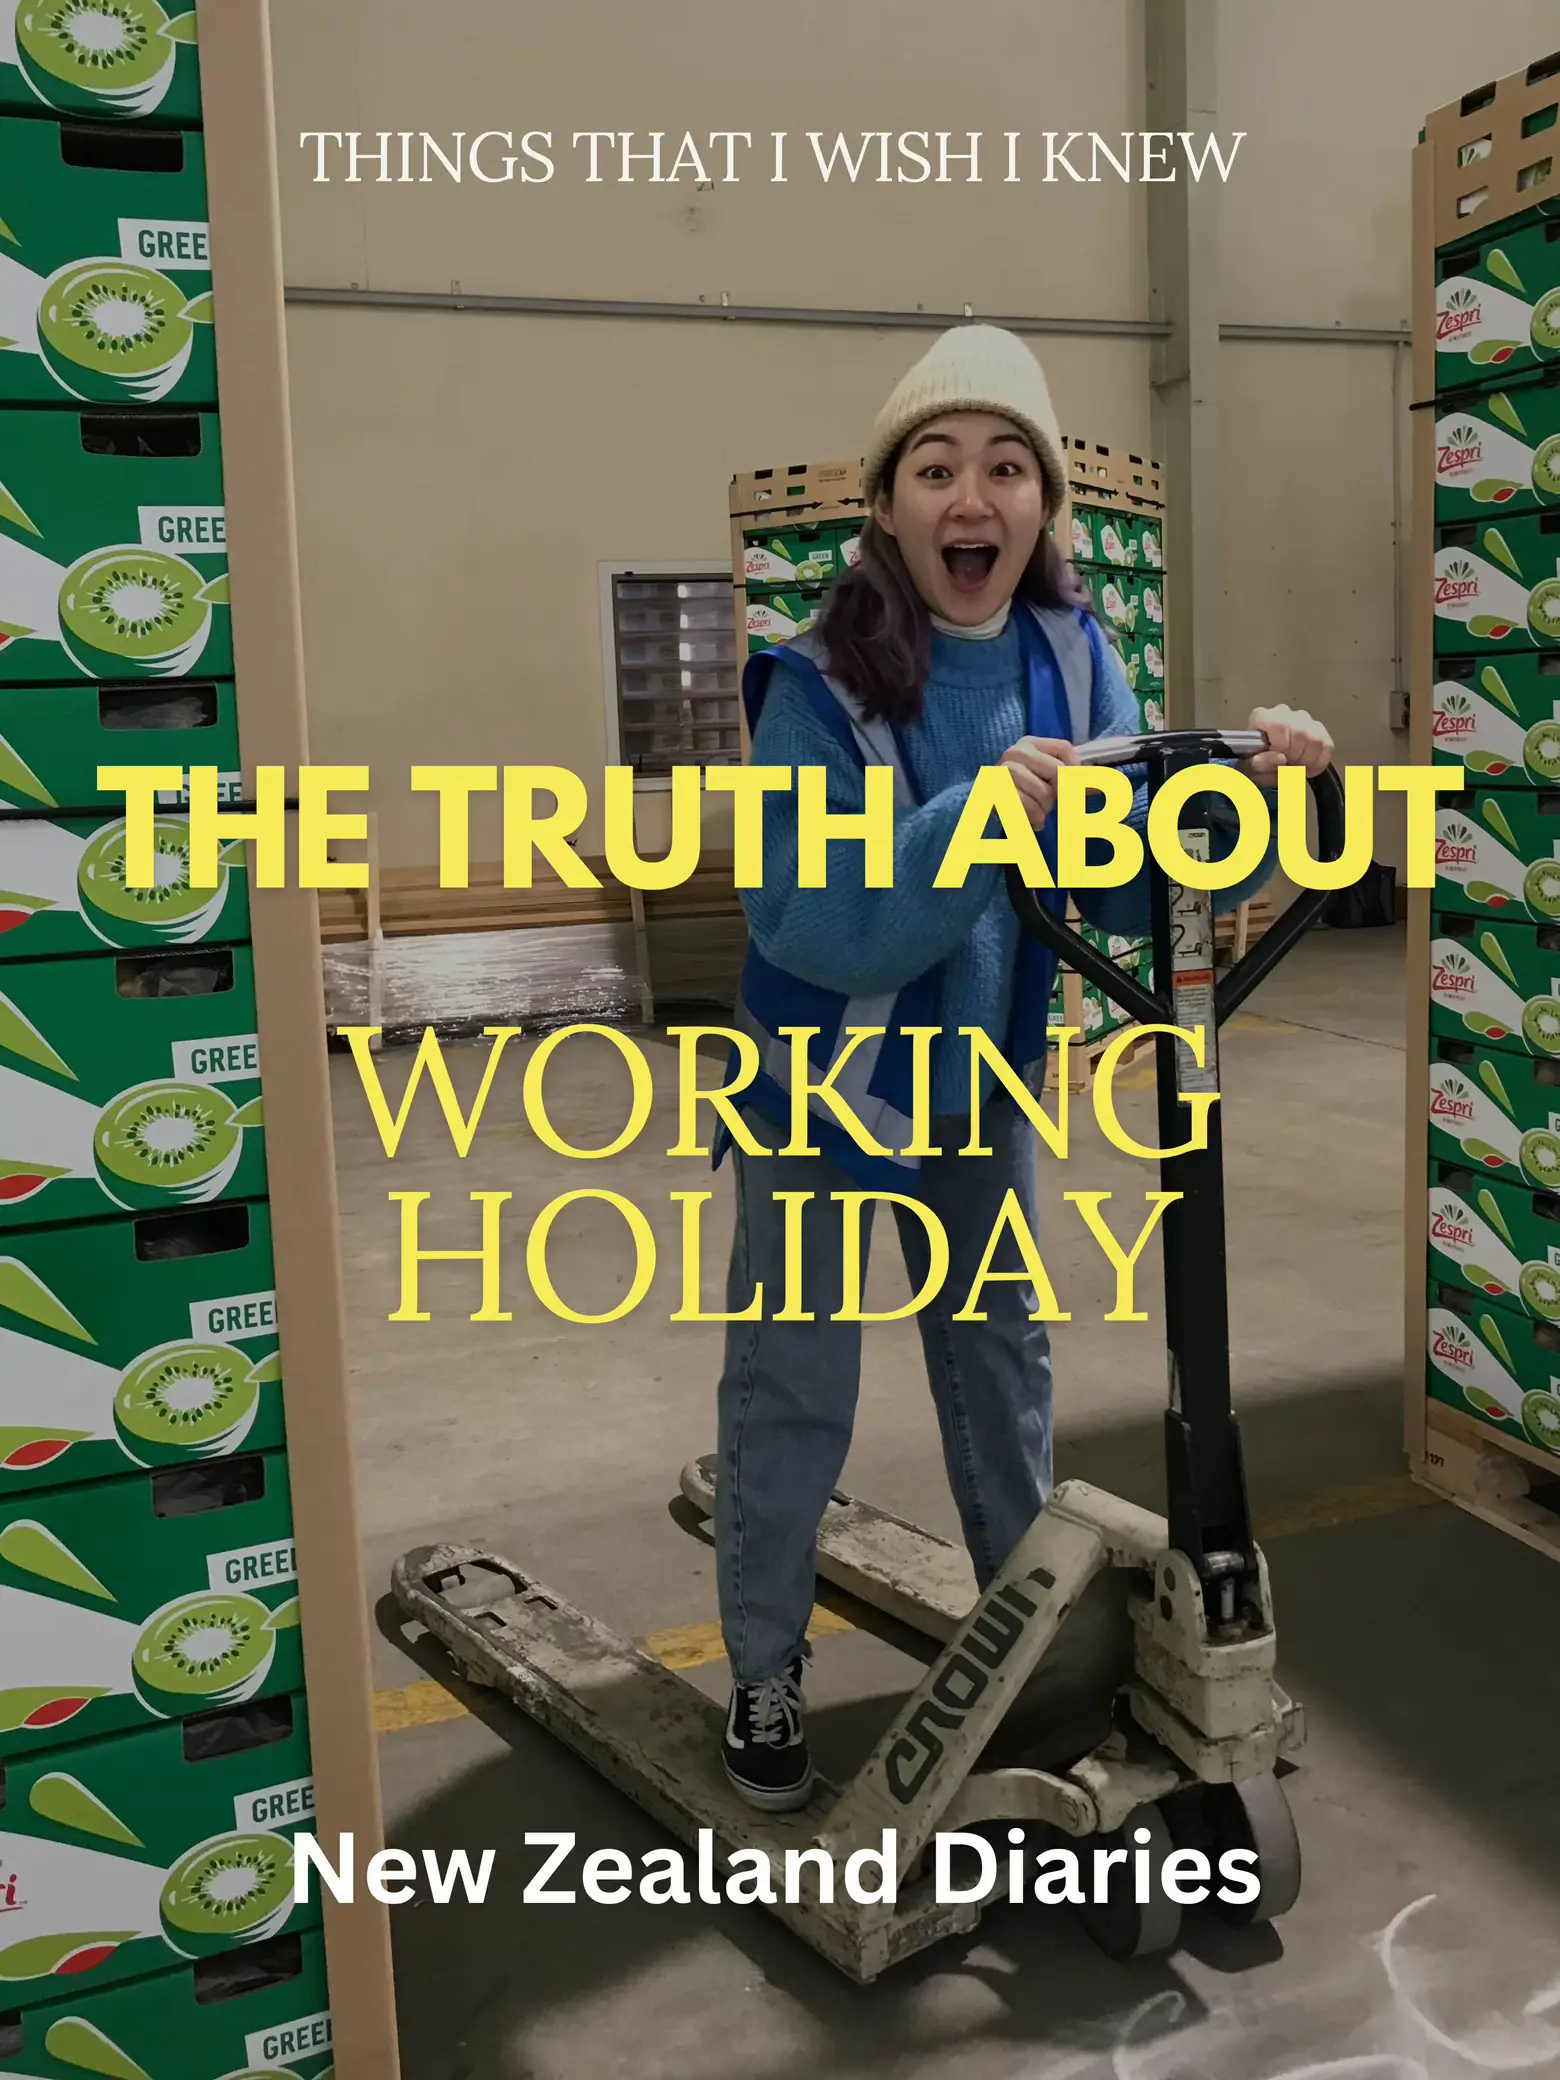 HARD TRUTH of working holiday that I wish I knew 🥲, Gallery posted by  Wern